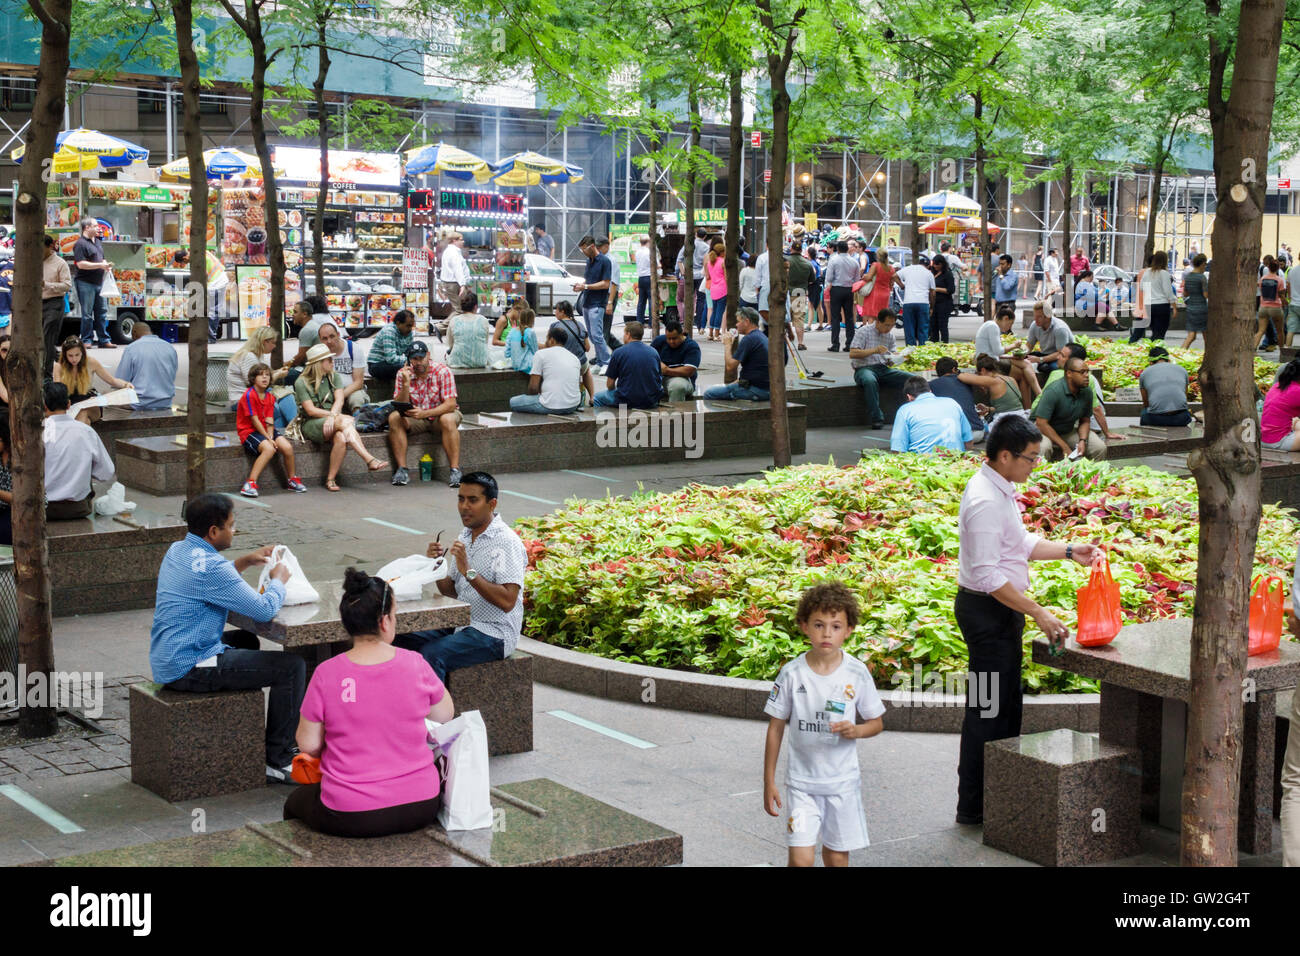 New York City,NY NYC,Lower Manhattan,Financial District,Zuccotti Park,Liberty Plaza Park,public park,crowded,Asian Asians ethnic immigrant immigrants Stock Photo